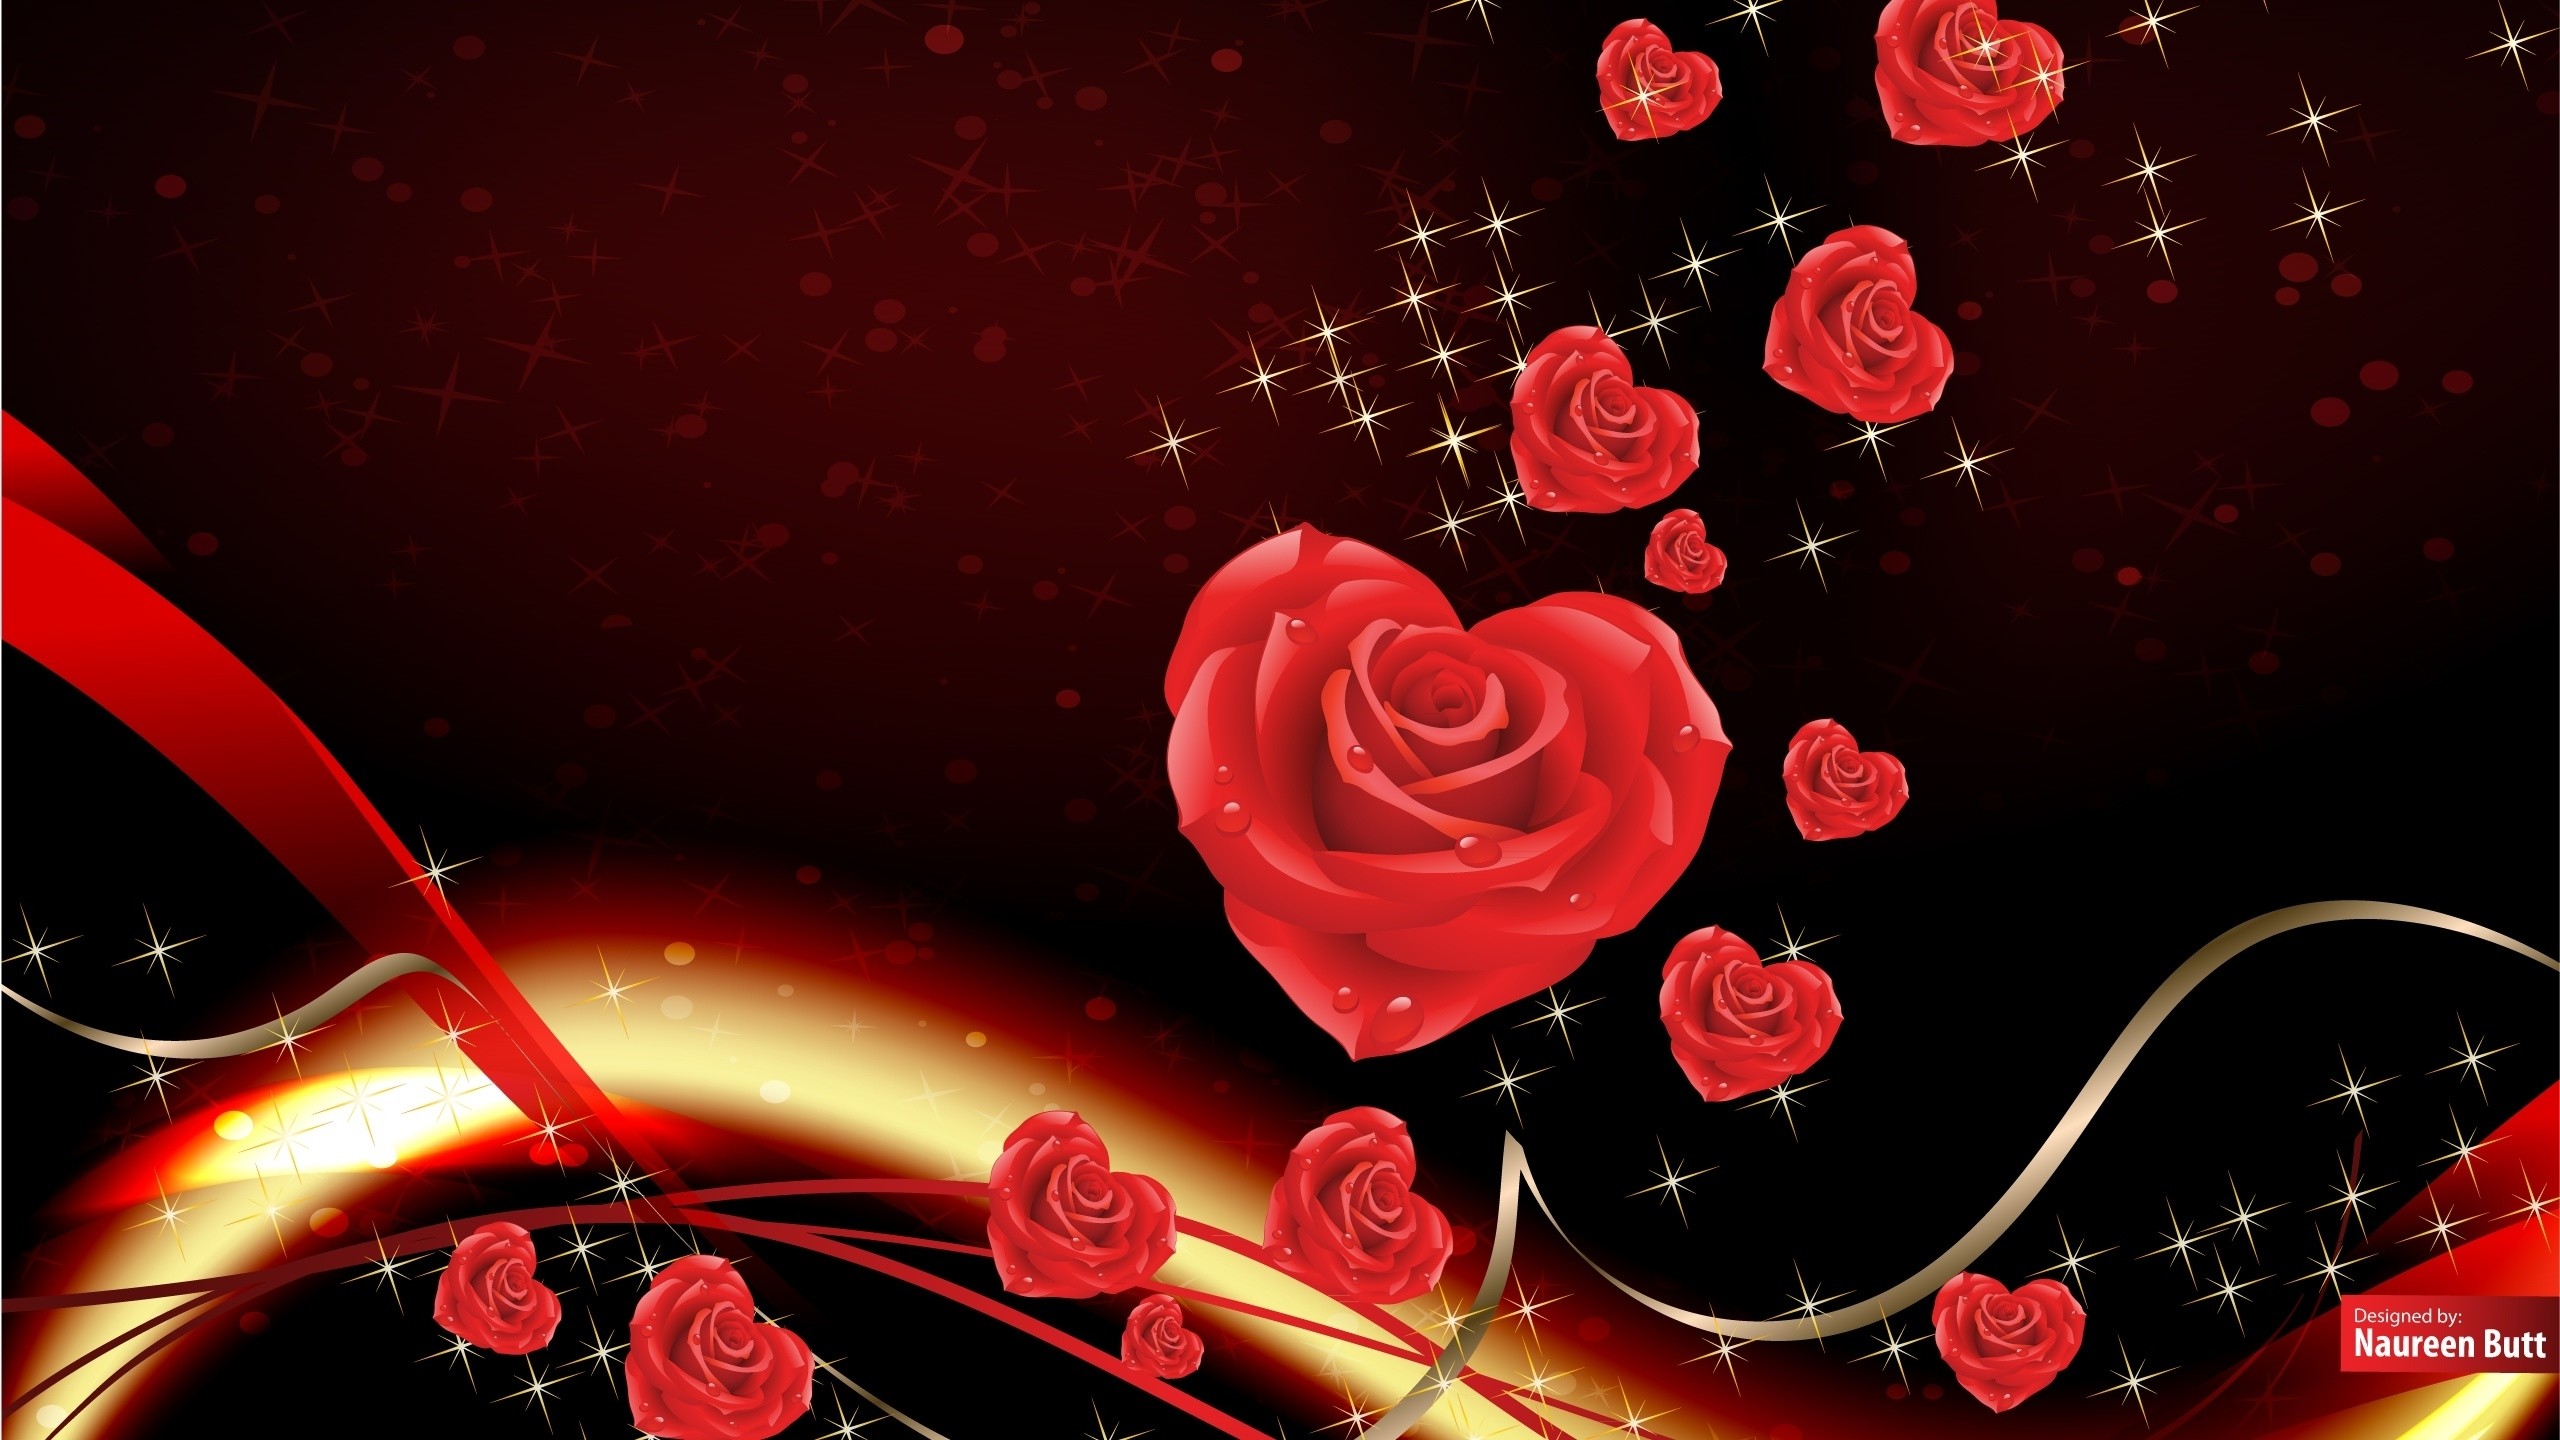 Title Valentines Day Desktop Wallpaper Free Quotes Amp Amp Wishes For Dimension 2560 X 1440 File Type Jpg Jpeg 2560x1440